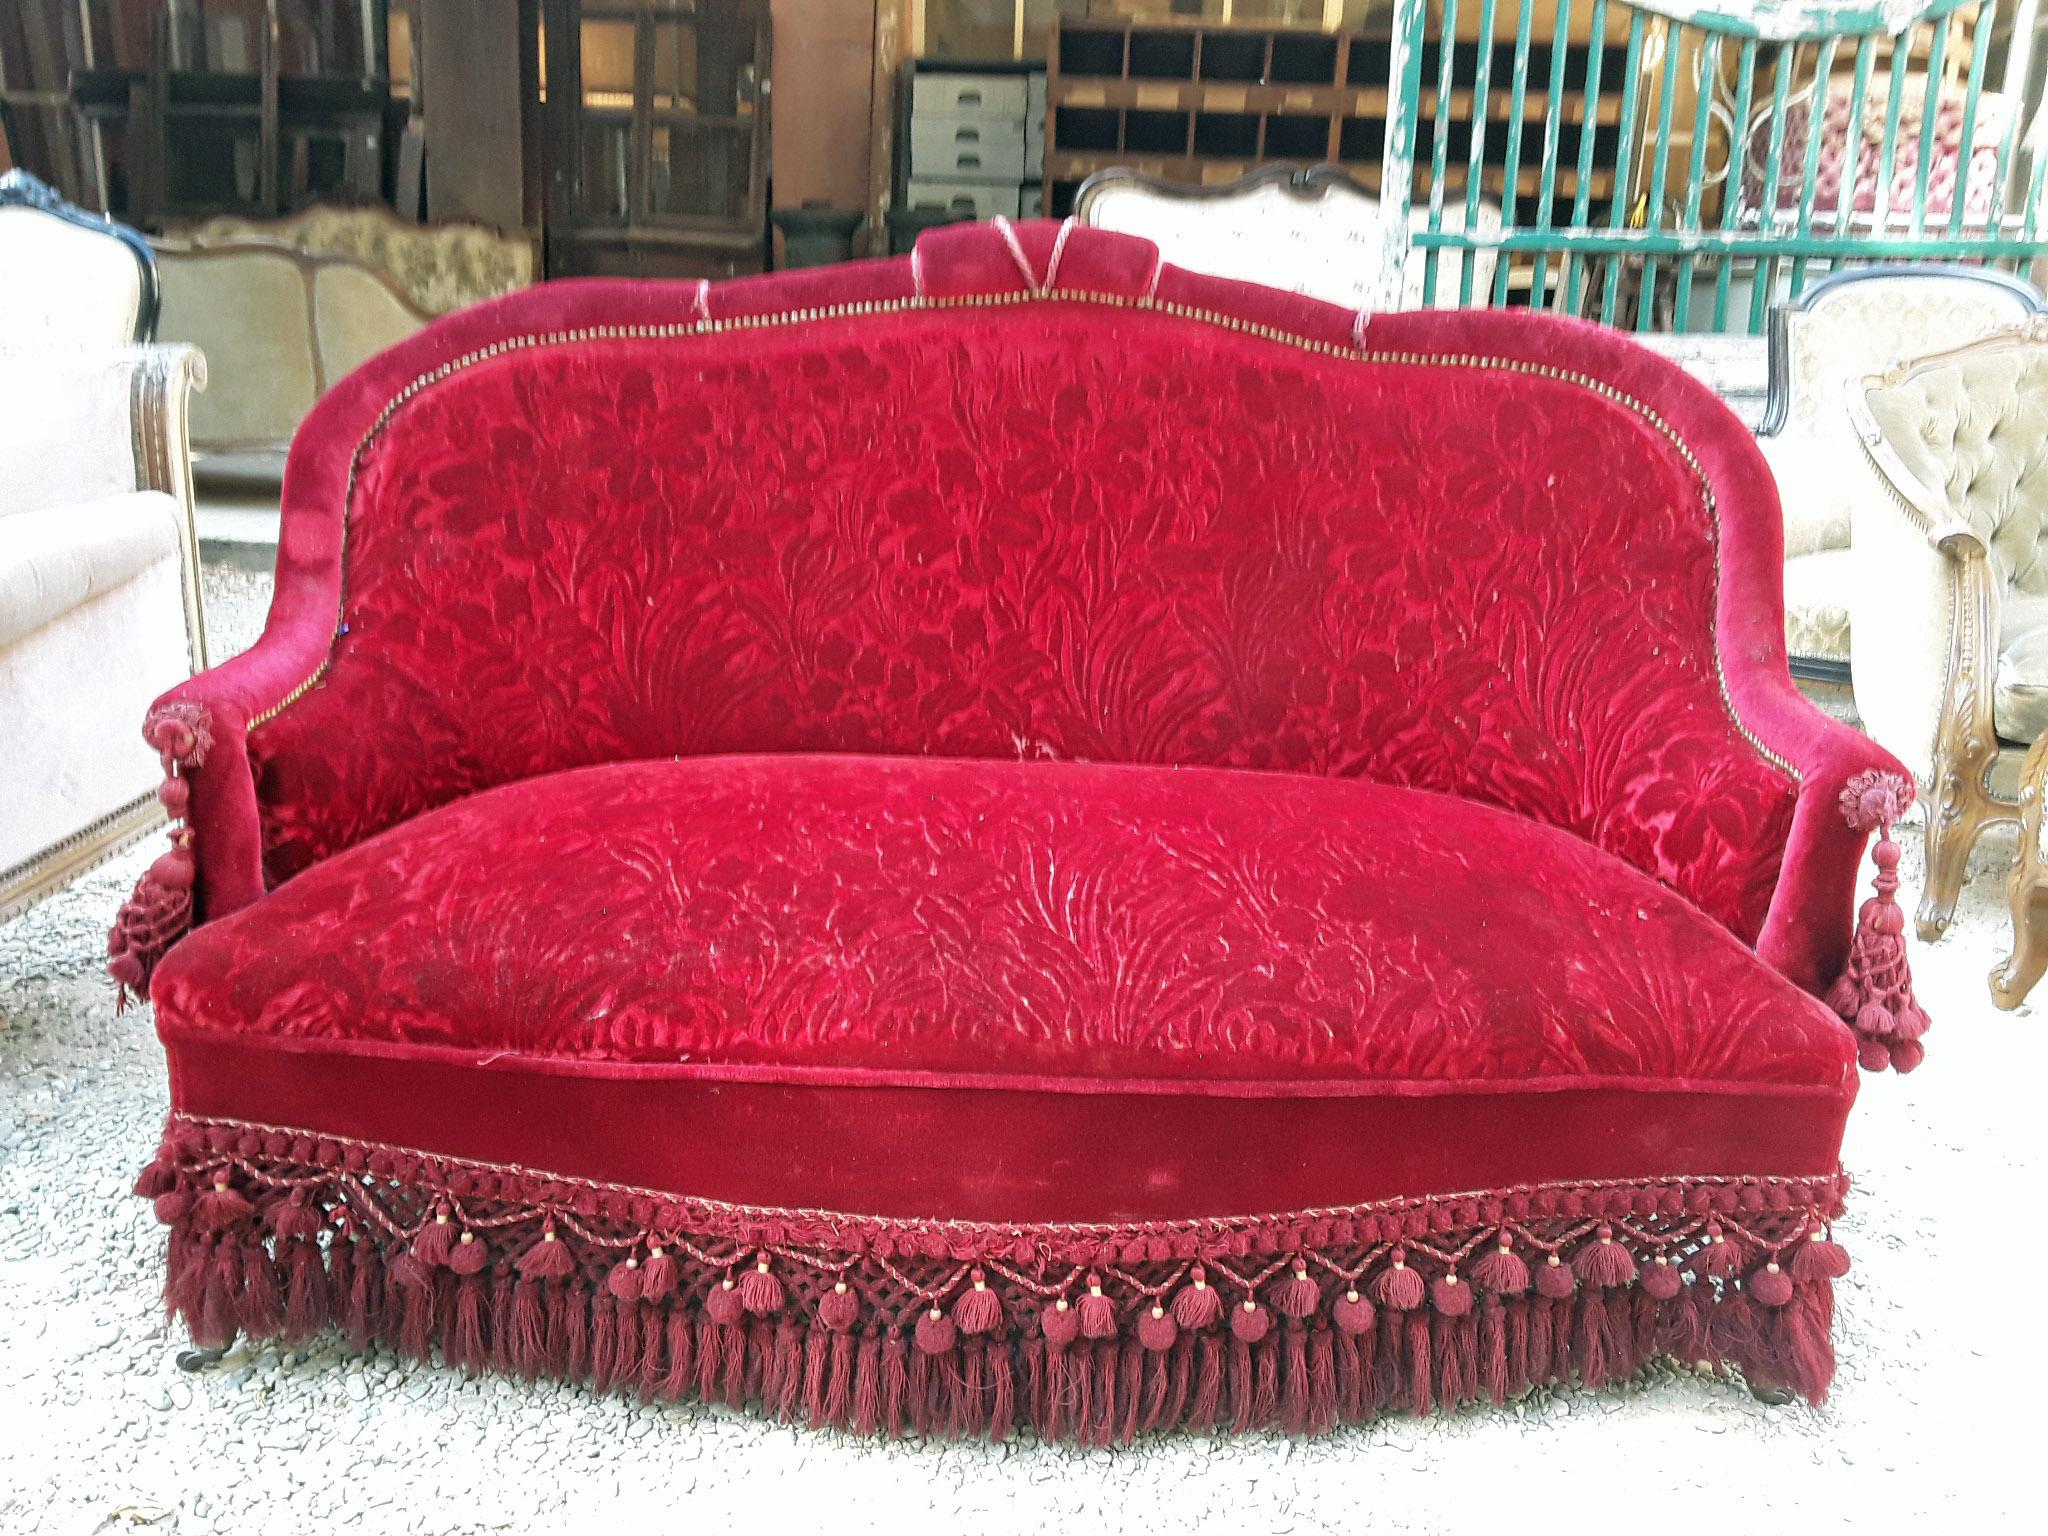 19th century, French wooden sofa with its original brocade velvet fabric.